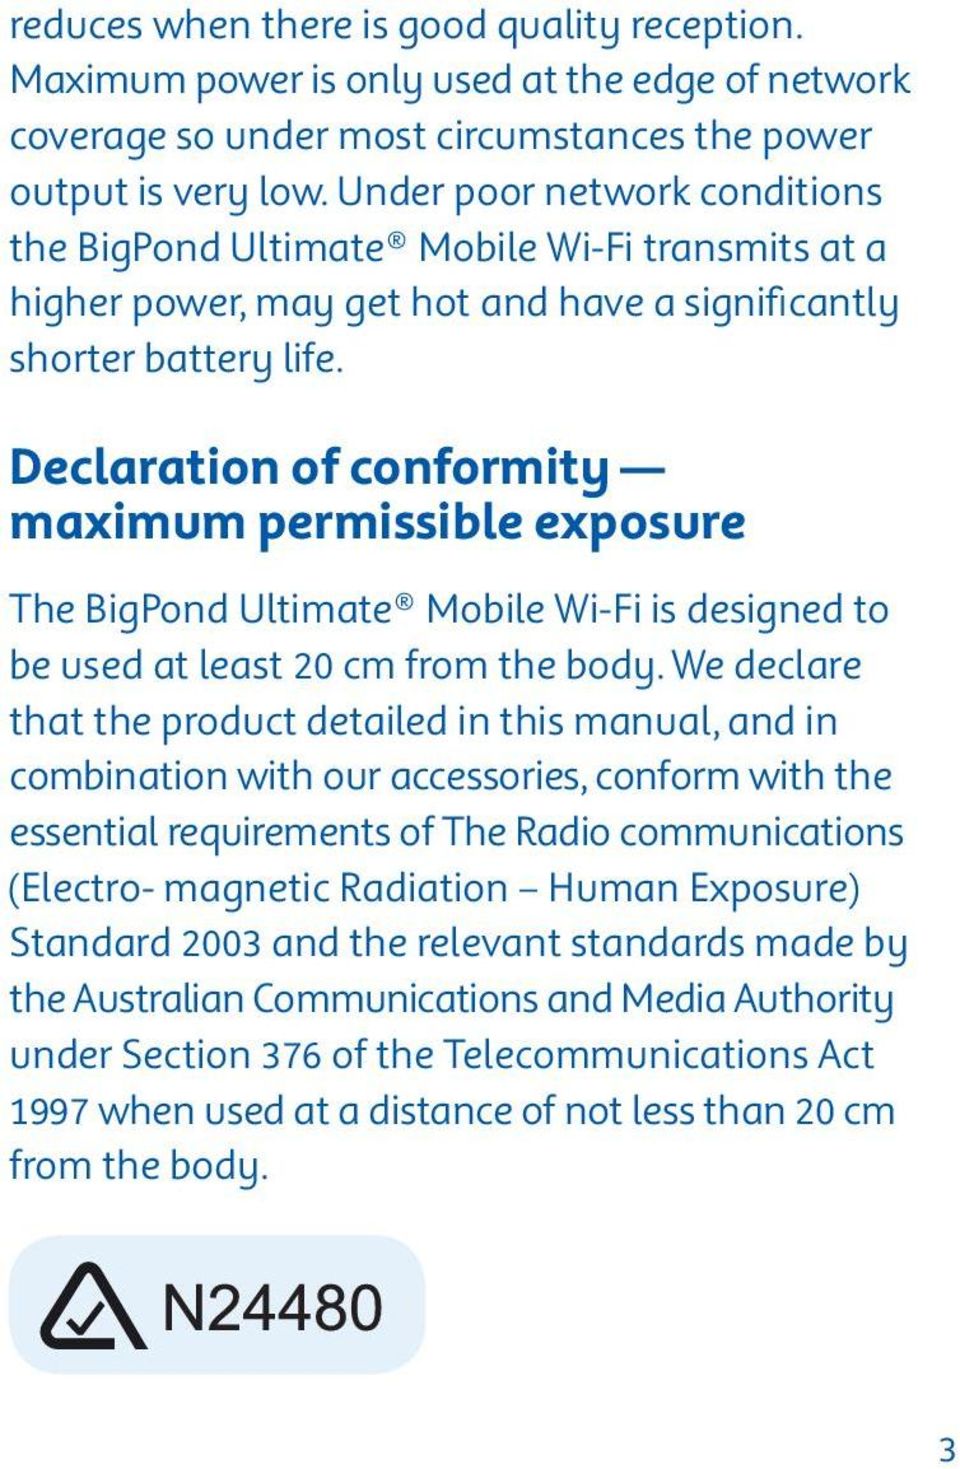 Declaration of conformity maximum permissible exposure The BigPond Ultimate Mobile Wi-Fi is designed to be used at least 20 cm from the body.